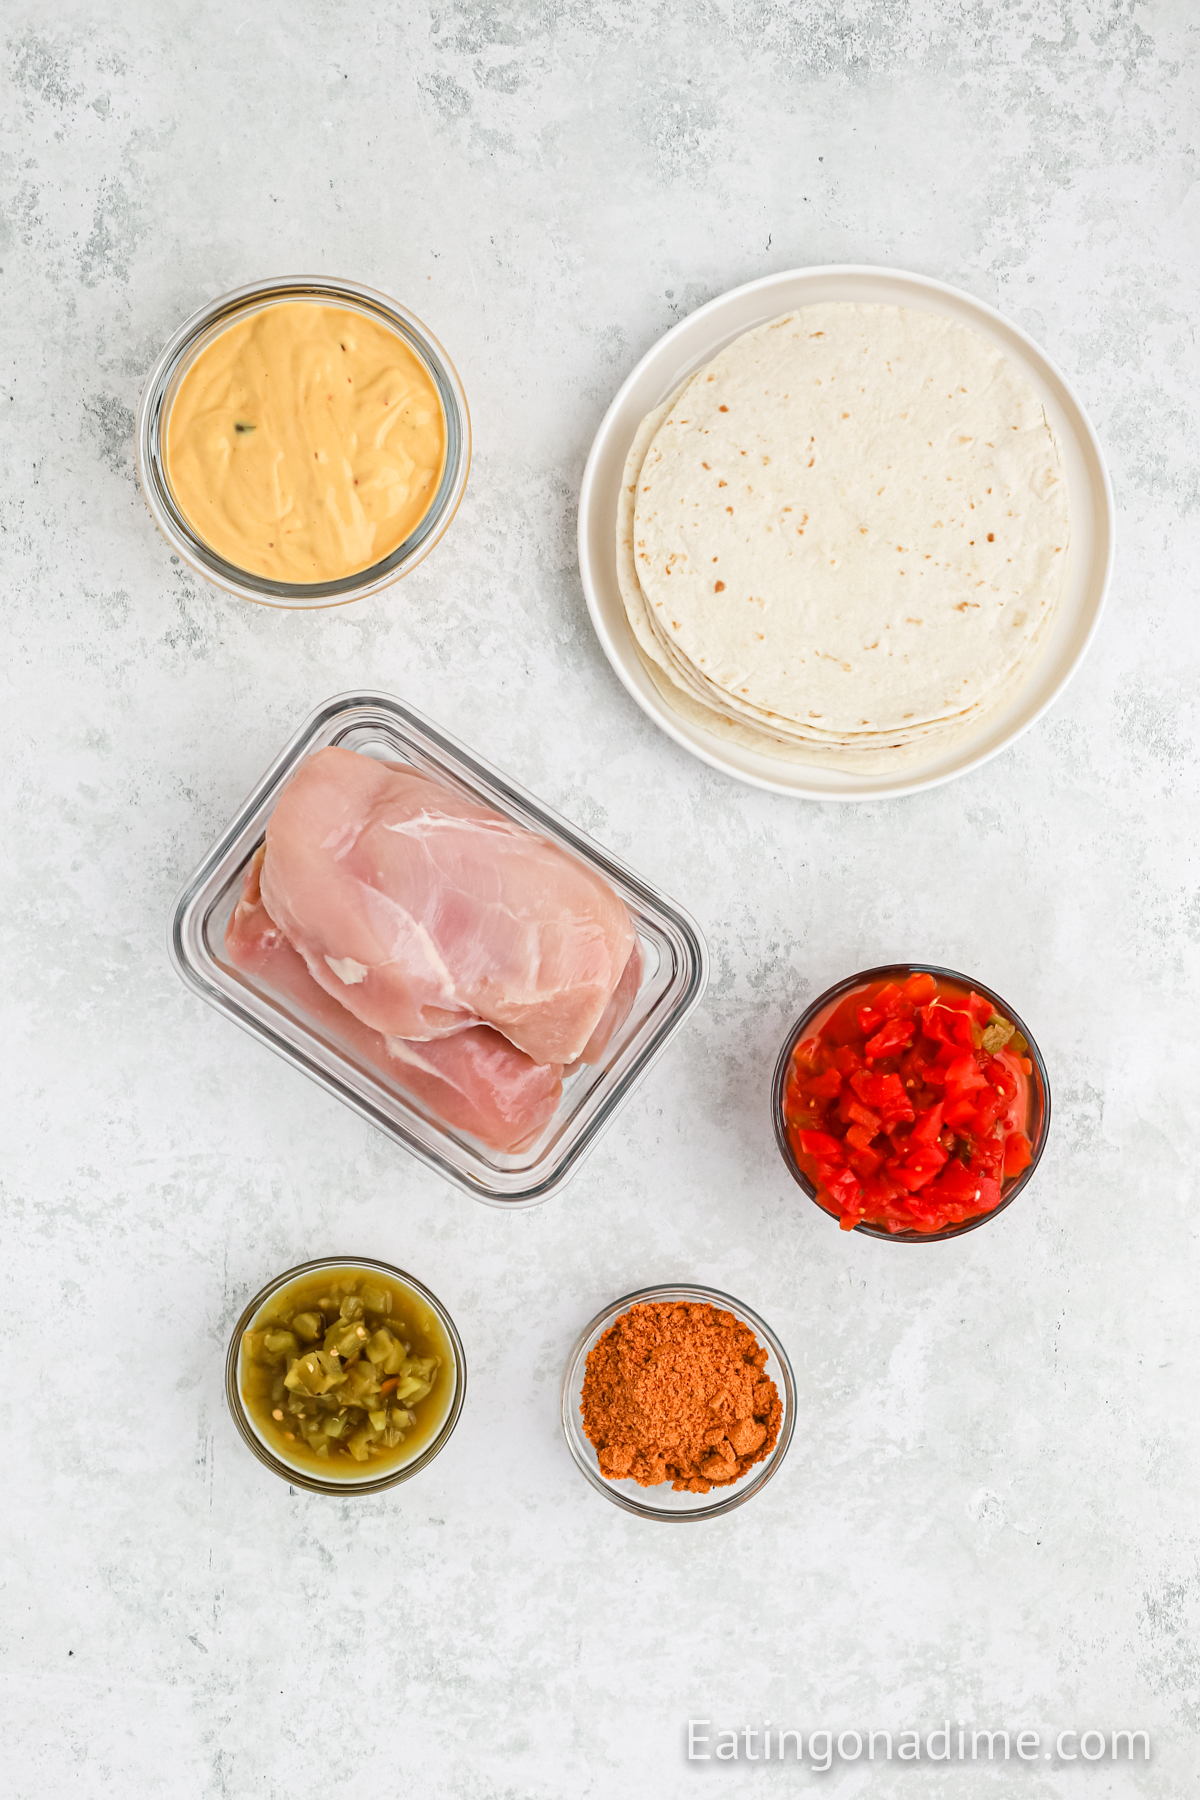 Ingredients needed - chicken breast, taco seasoning, diced tomatoes with green chiles, green chiles, salsa con queso, flour tortillas, taco toppings